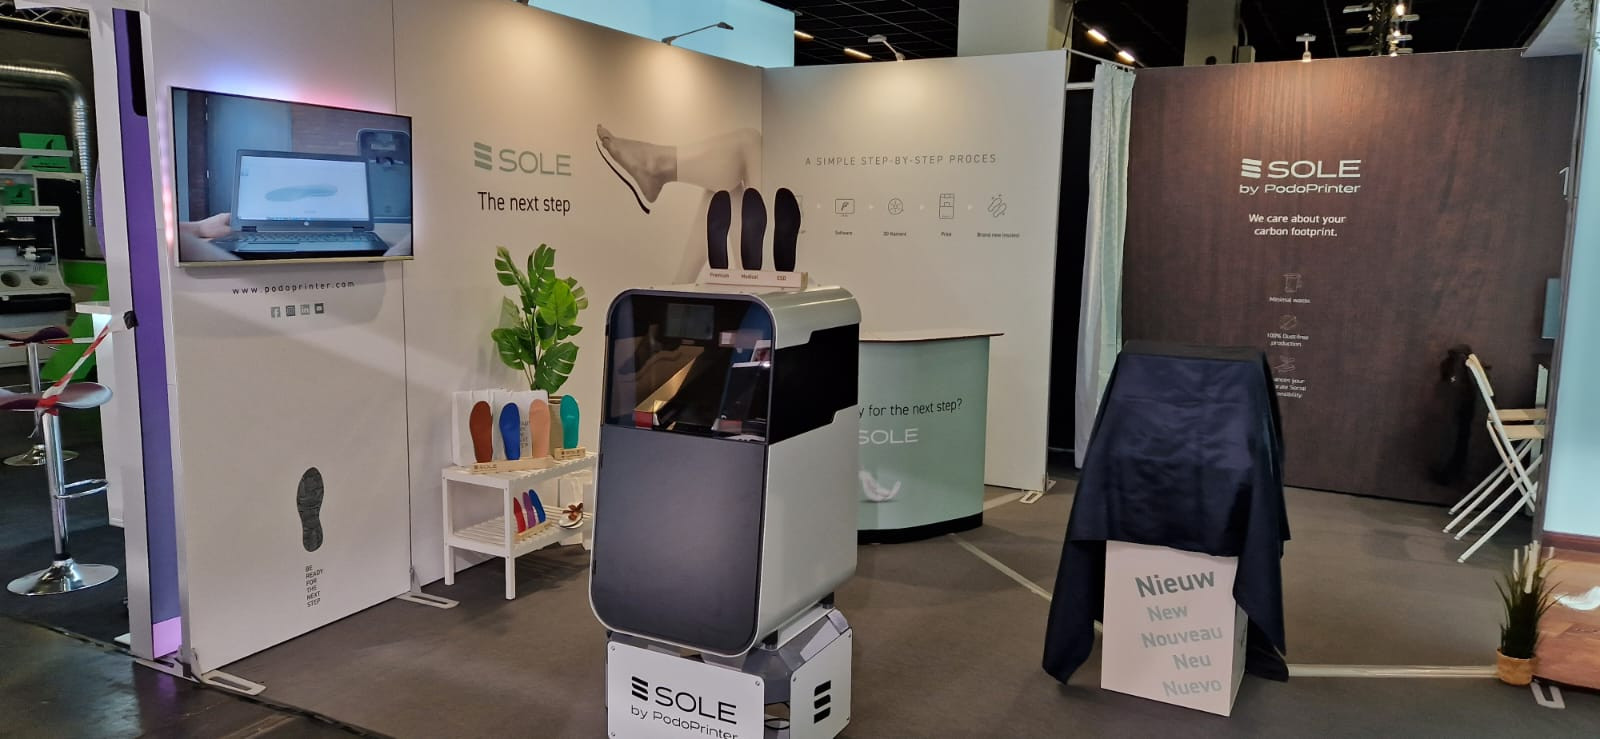 Sole by Podoprinter ontwerp eXpo eXpert 02